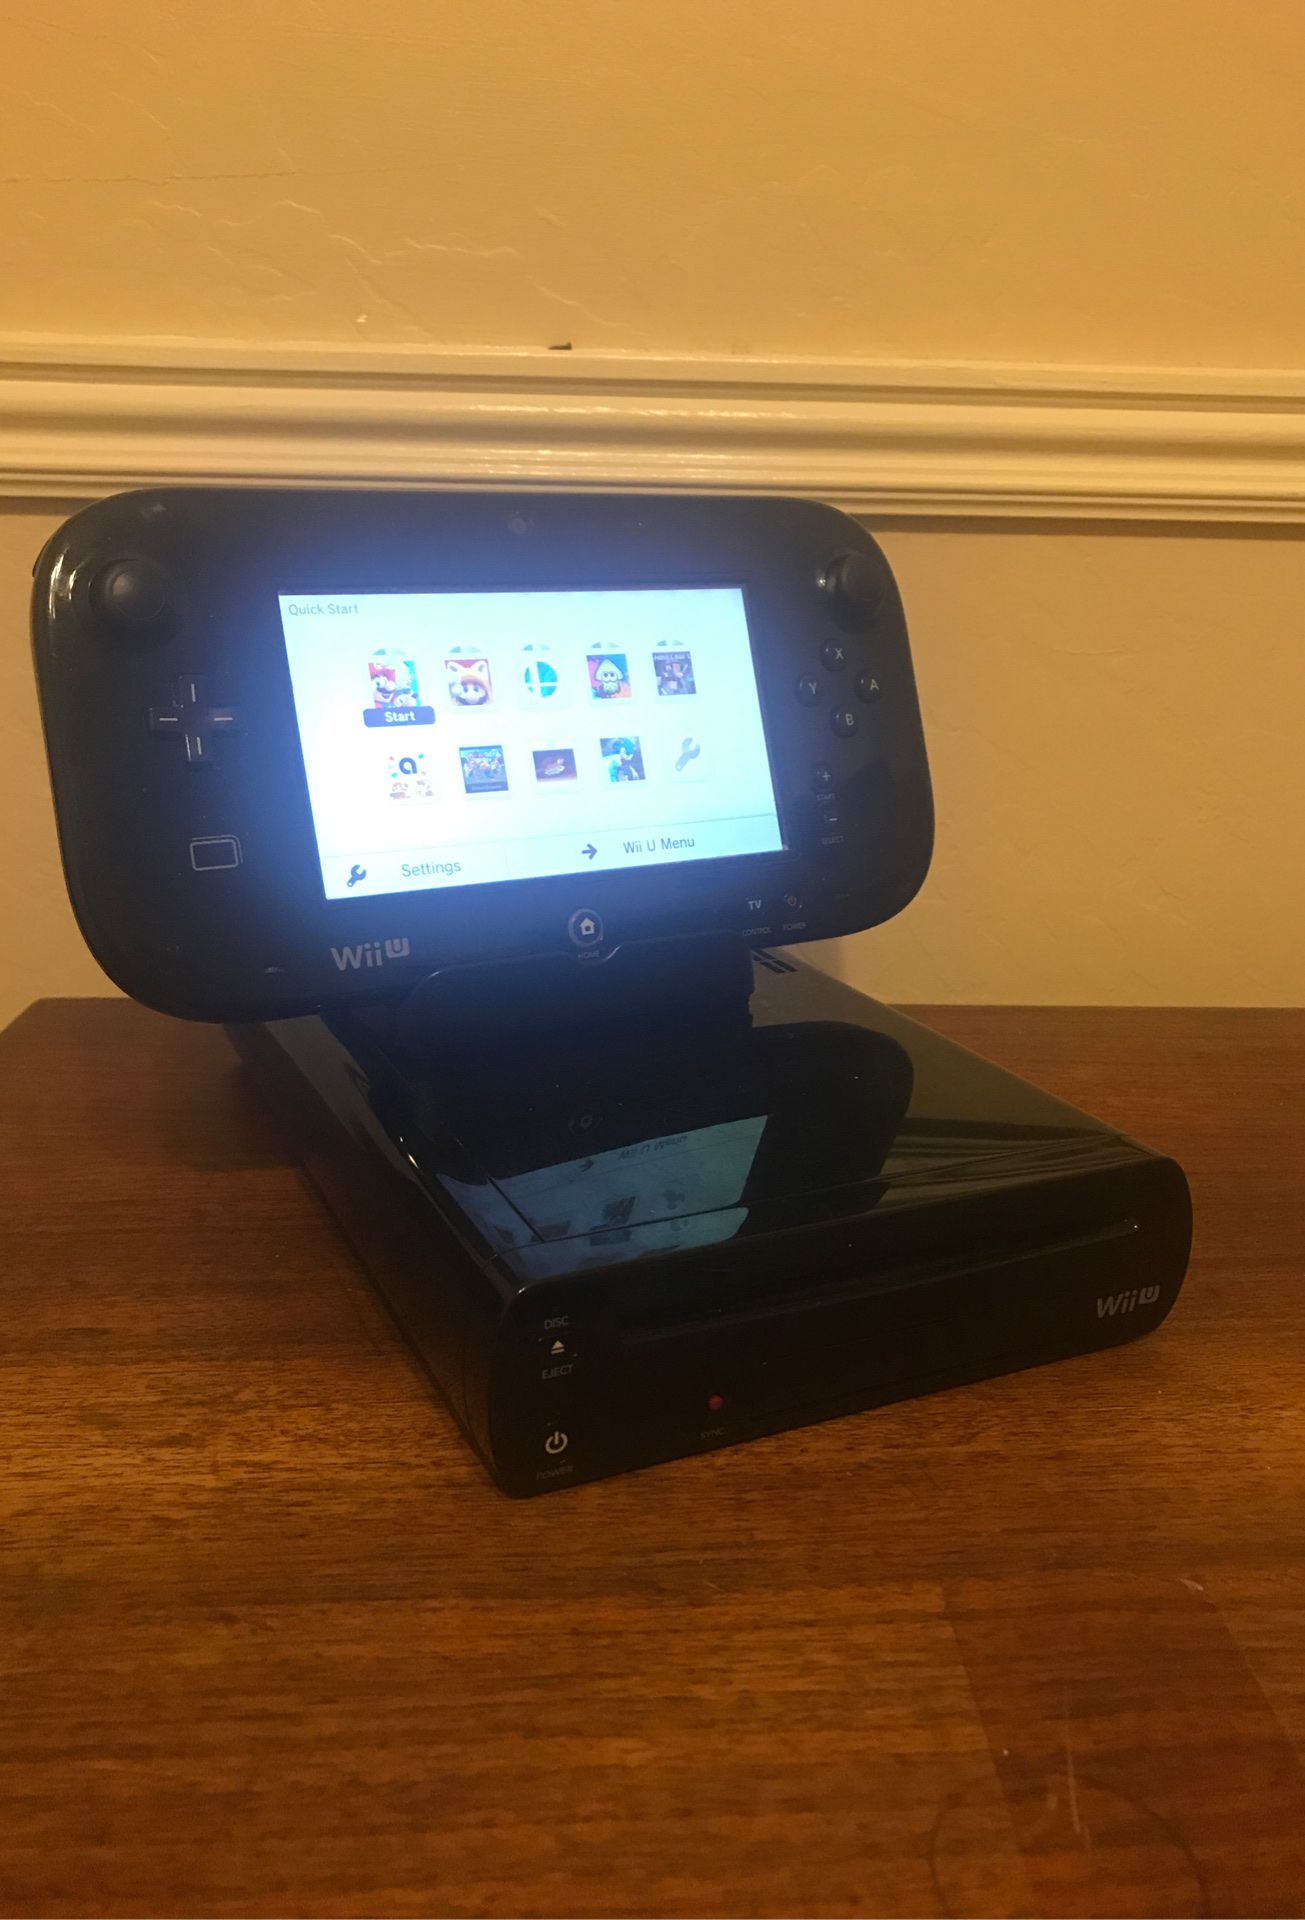 Nintendo Wii U with loaded games, gamepad, and charging dock